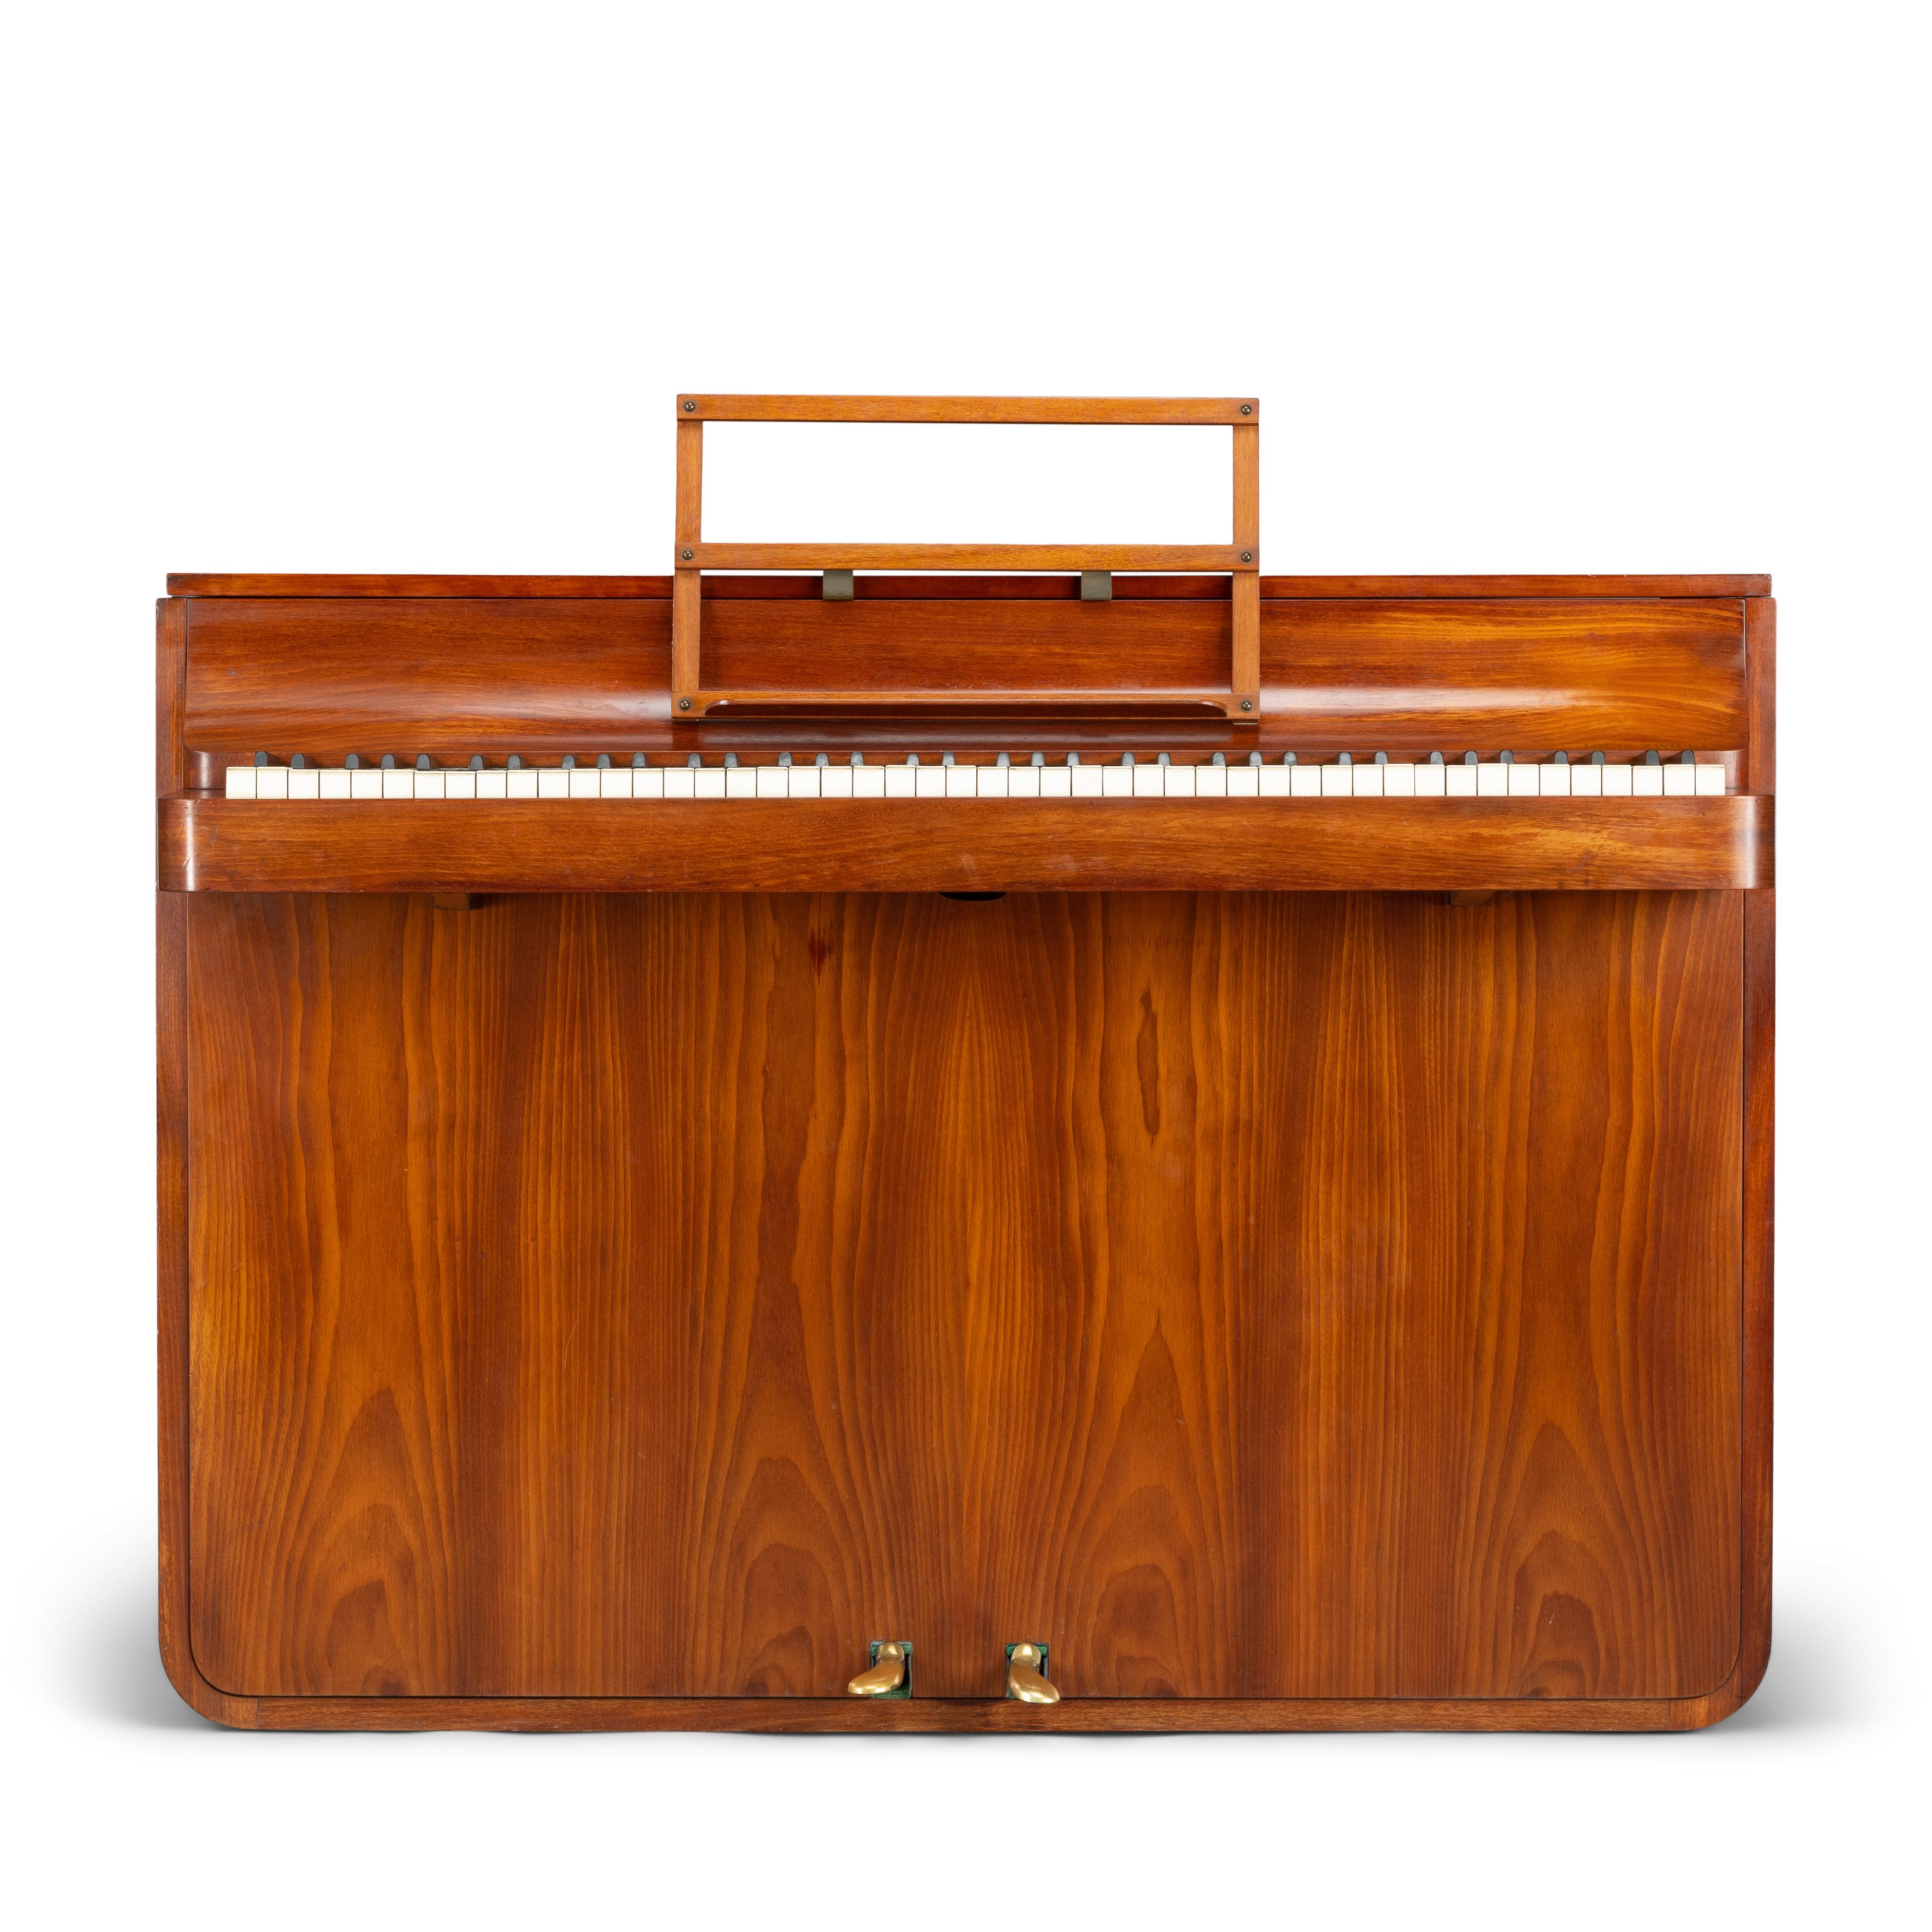 A rare Danish midcentury pianette made of magnificent teak with shellac coating. It is called pianette due to the 82 keys rather than the standard 88 of a full size piano. This pianette is made by renowned piano maker Louis Zwicki. Every piano from